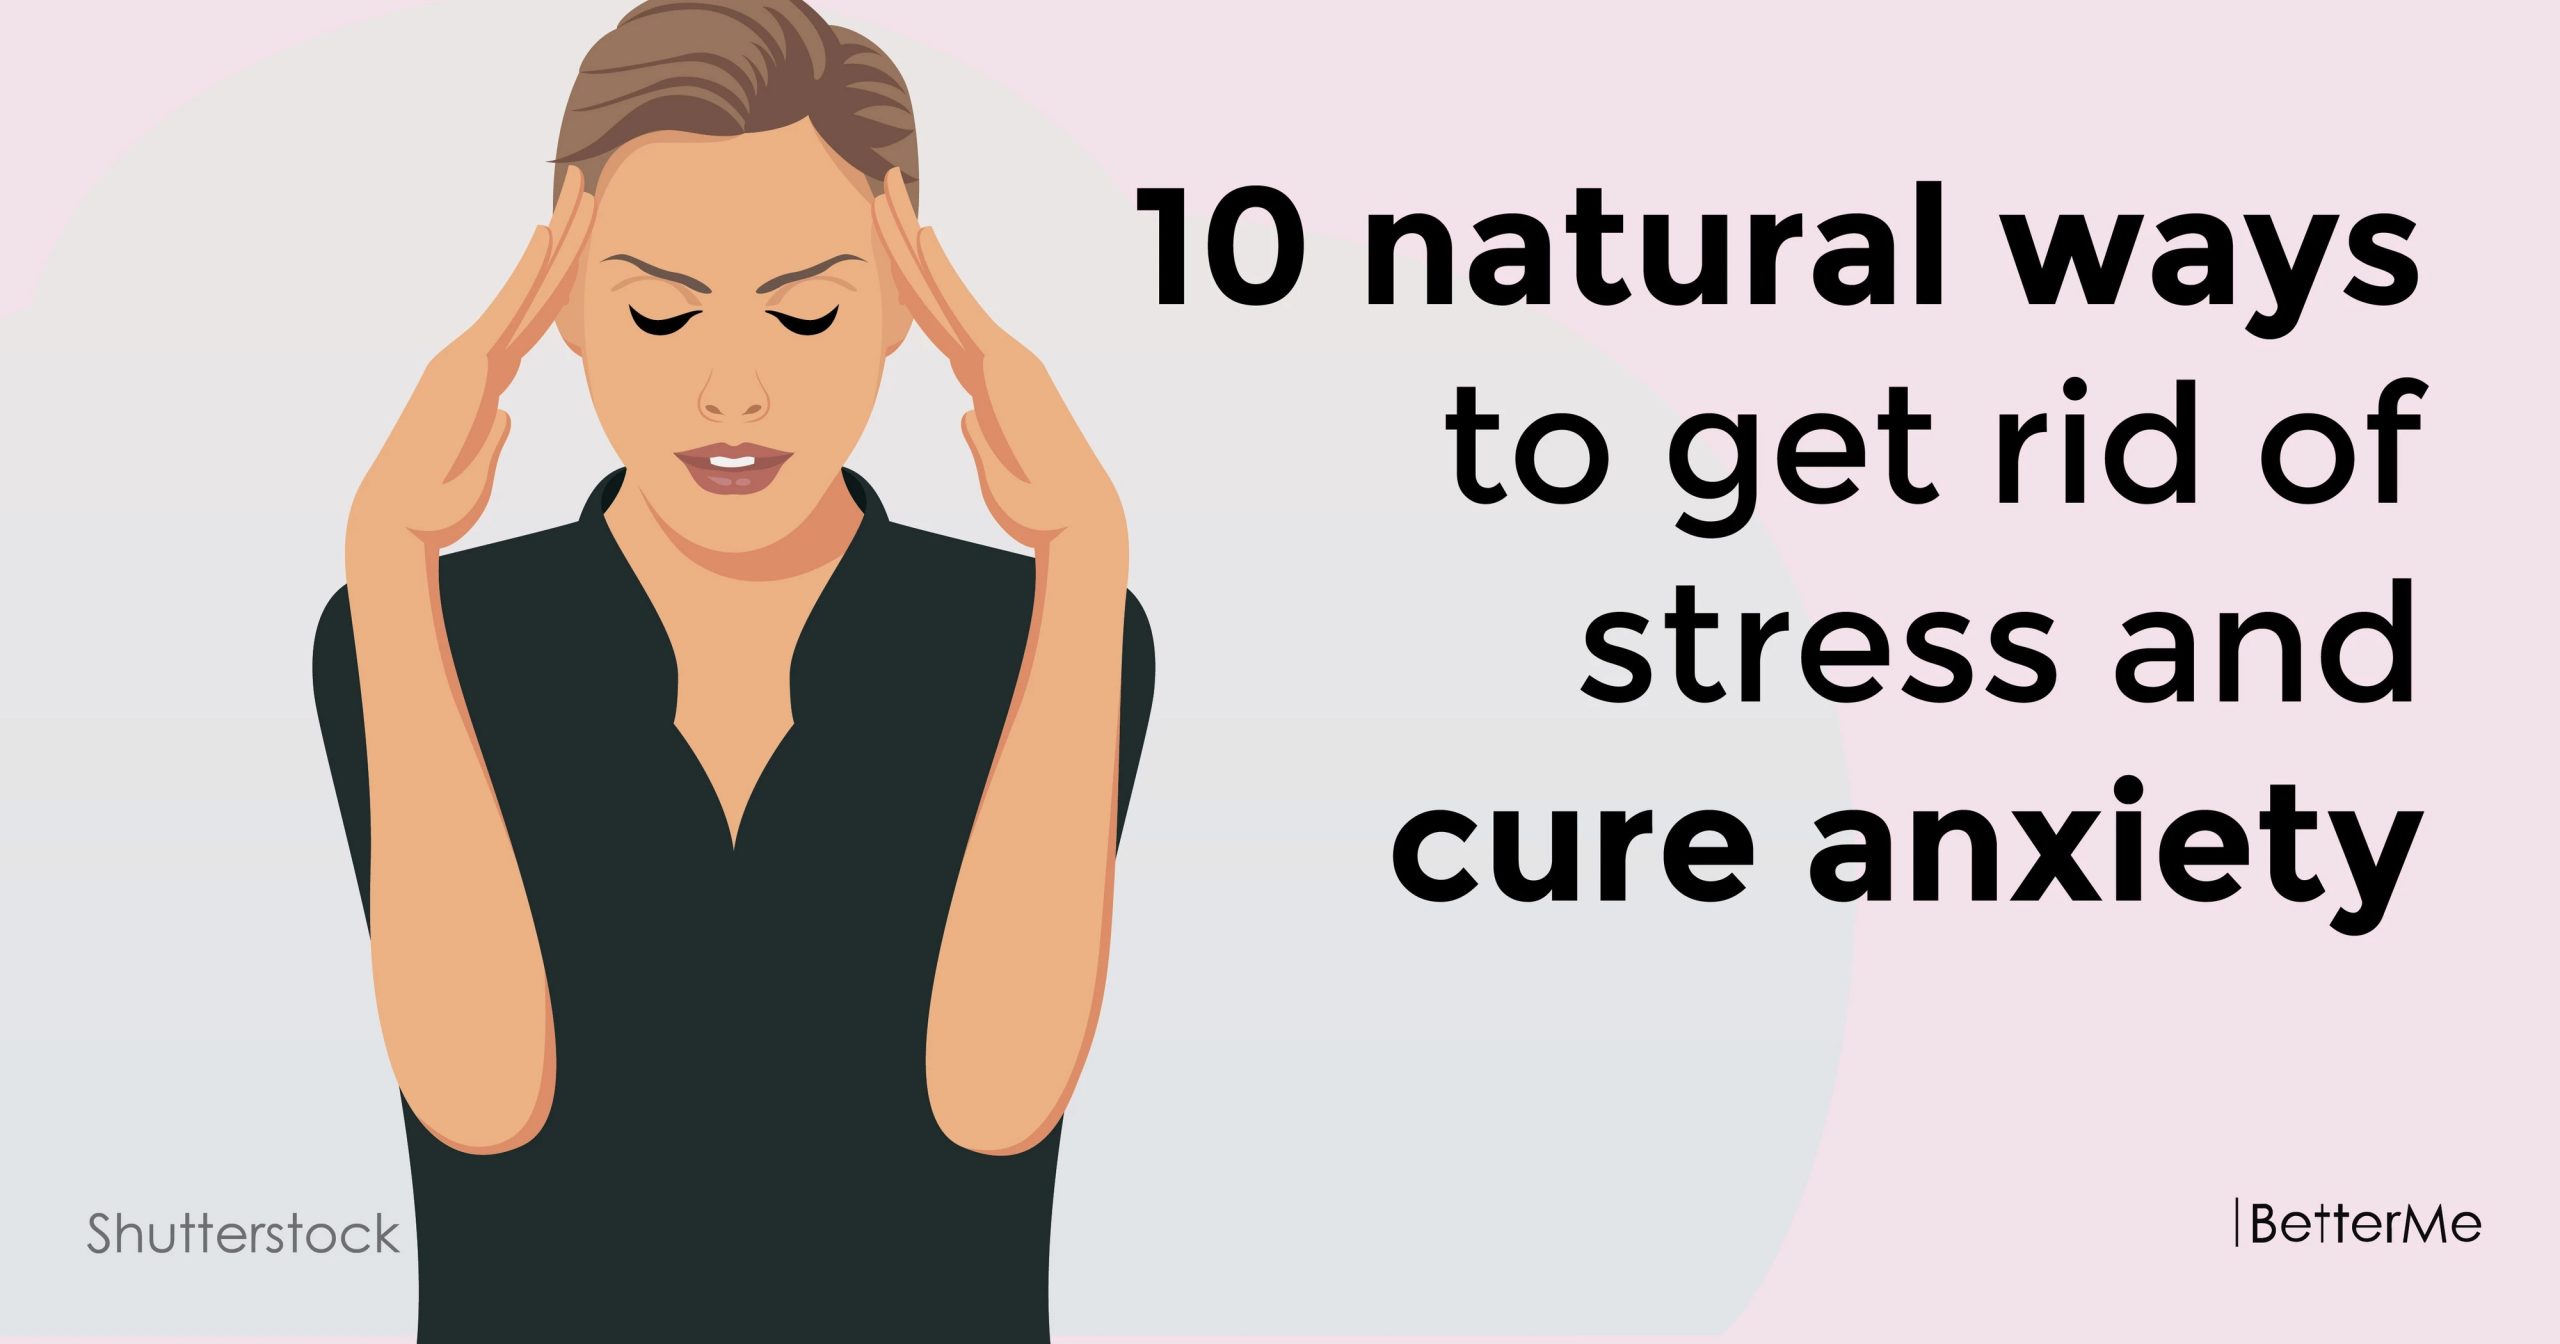 10 natural ways to get rid of stress and cure anxiety